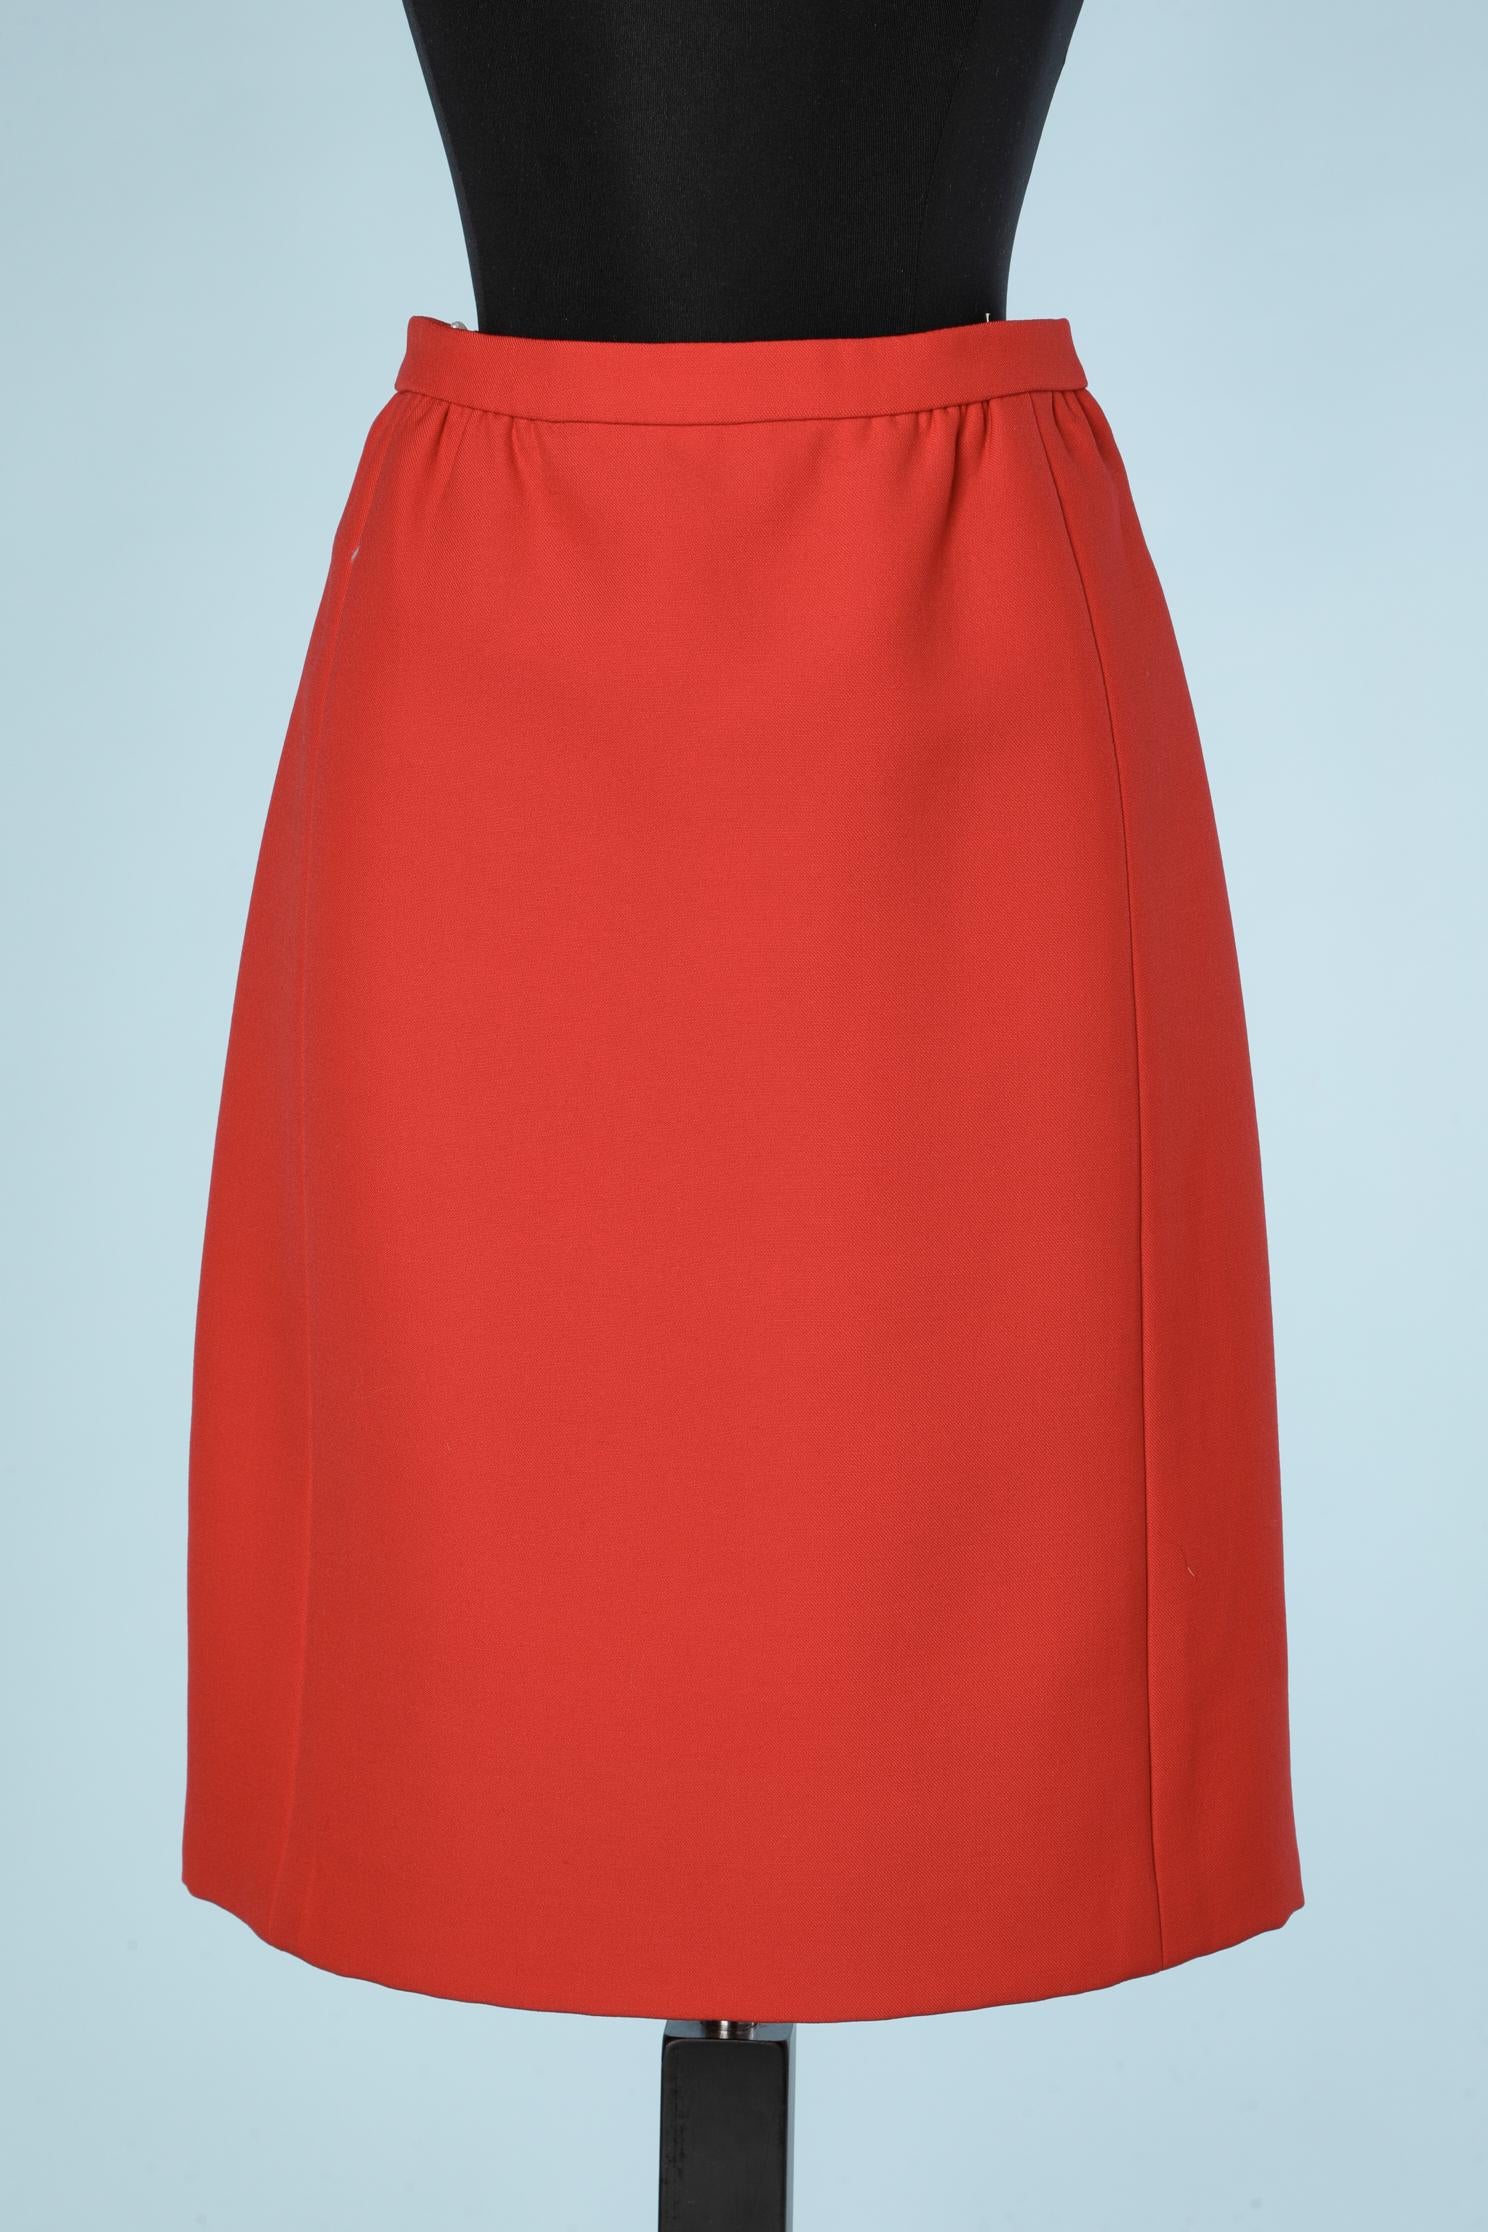 Red wool skirt-suit Christian Dior NY Inc for Bullock's Wilshire 6